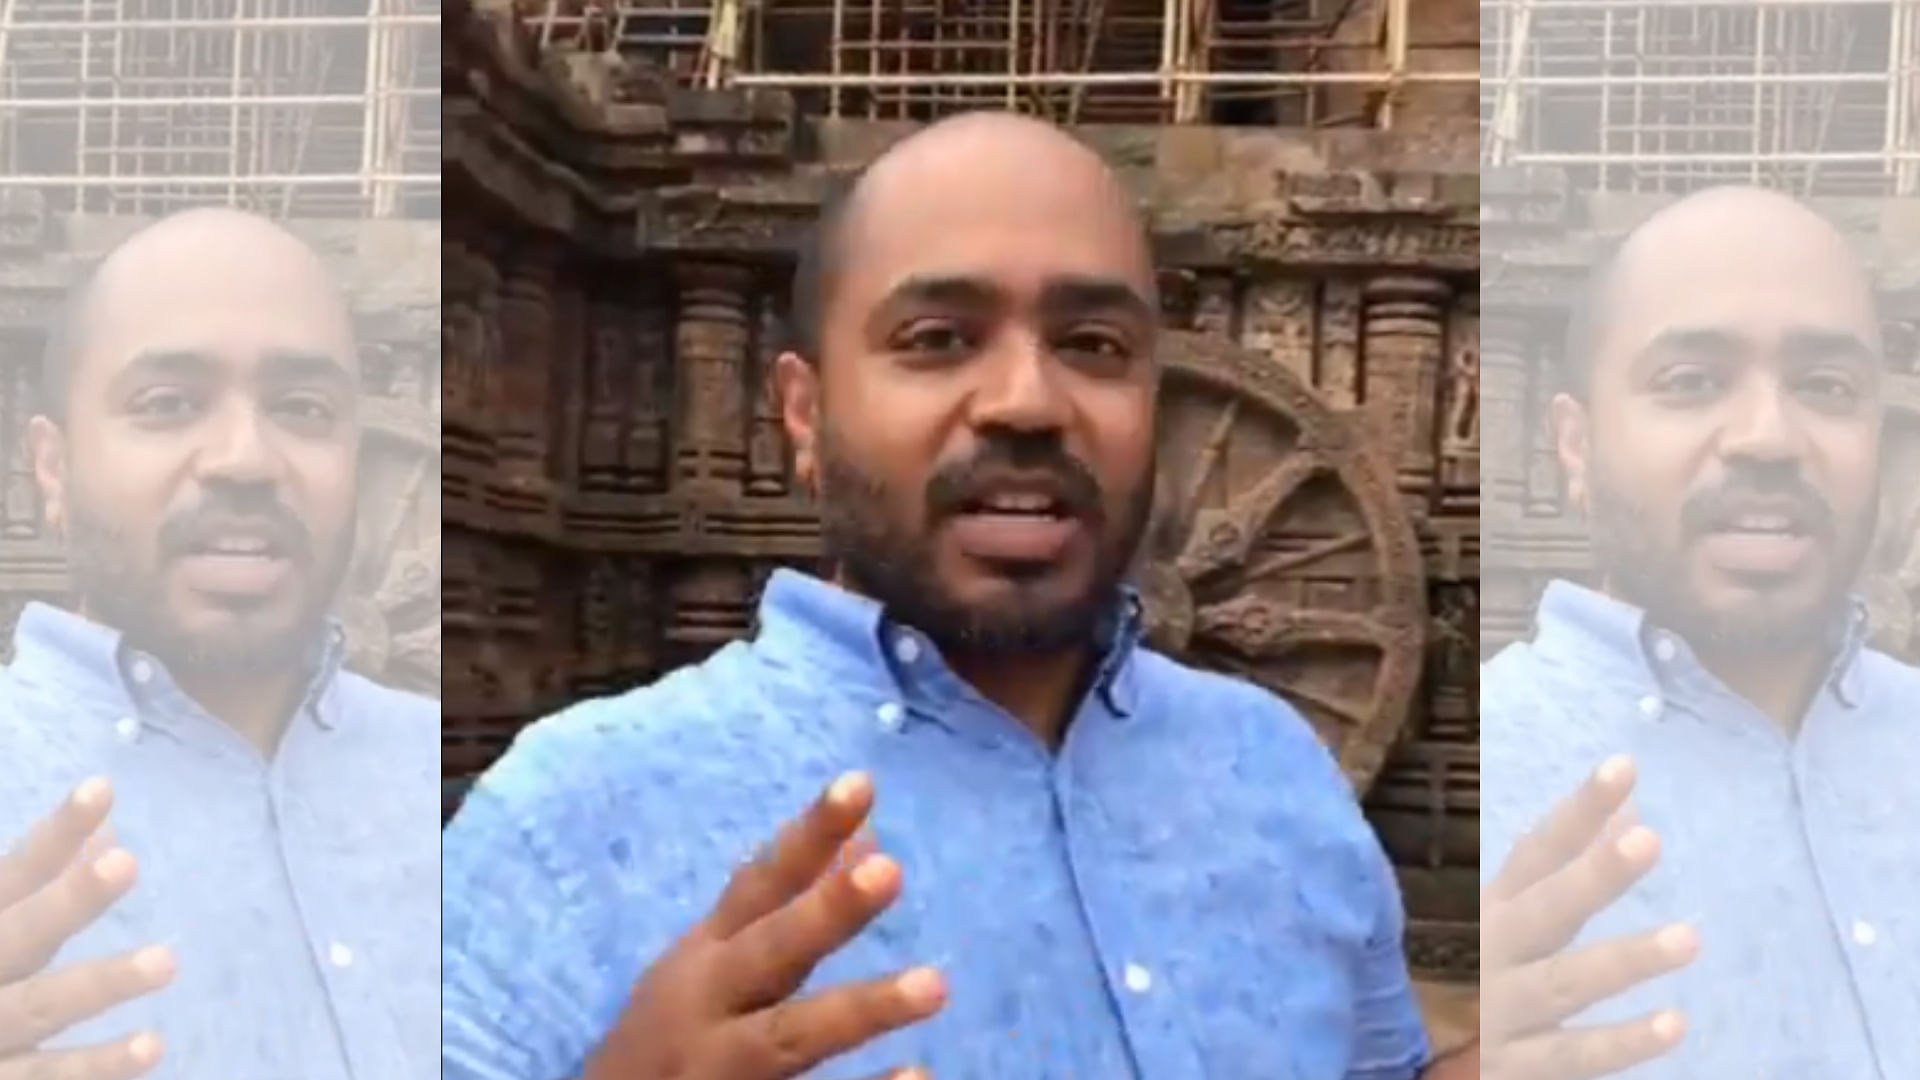 Delhi-based defence analyst Abhijit Iyer-Mitra was arrested in Bhubaneswar recently for his remarks seen as derogatory to the history and culture of the state.